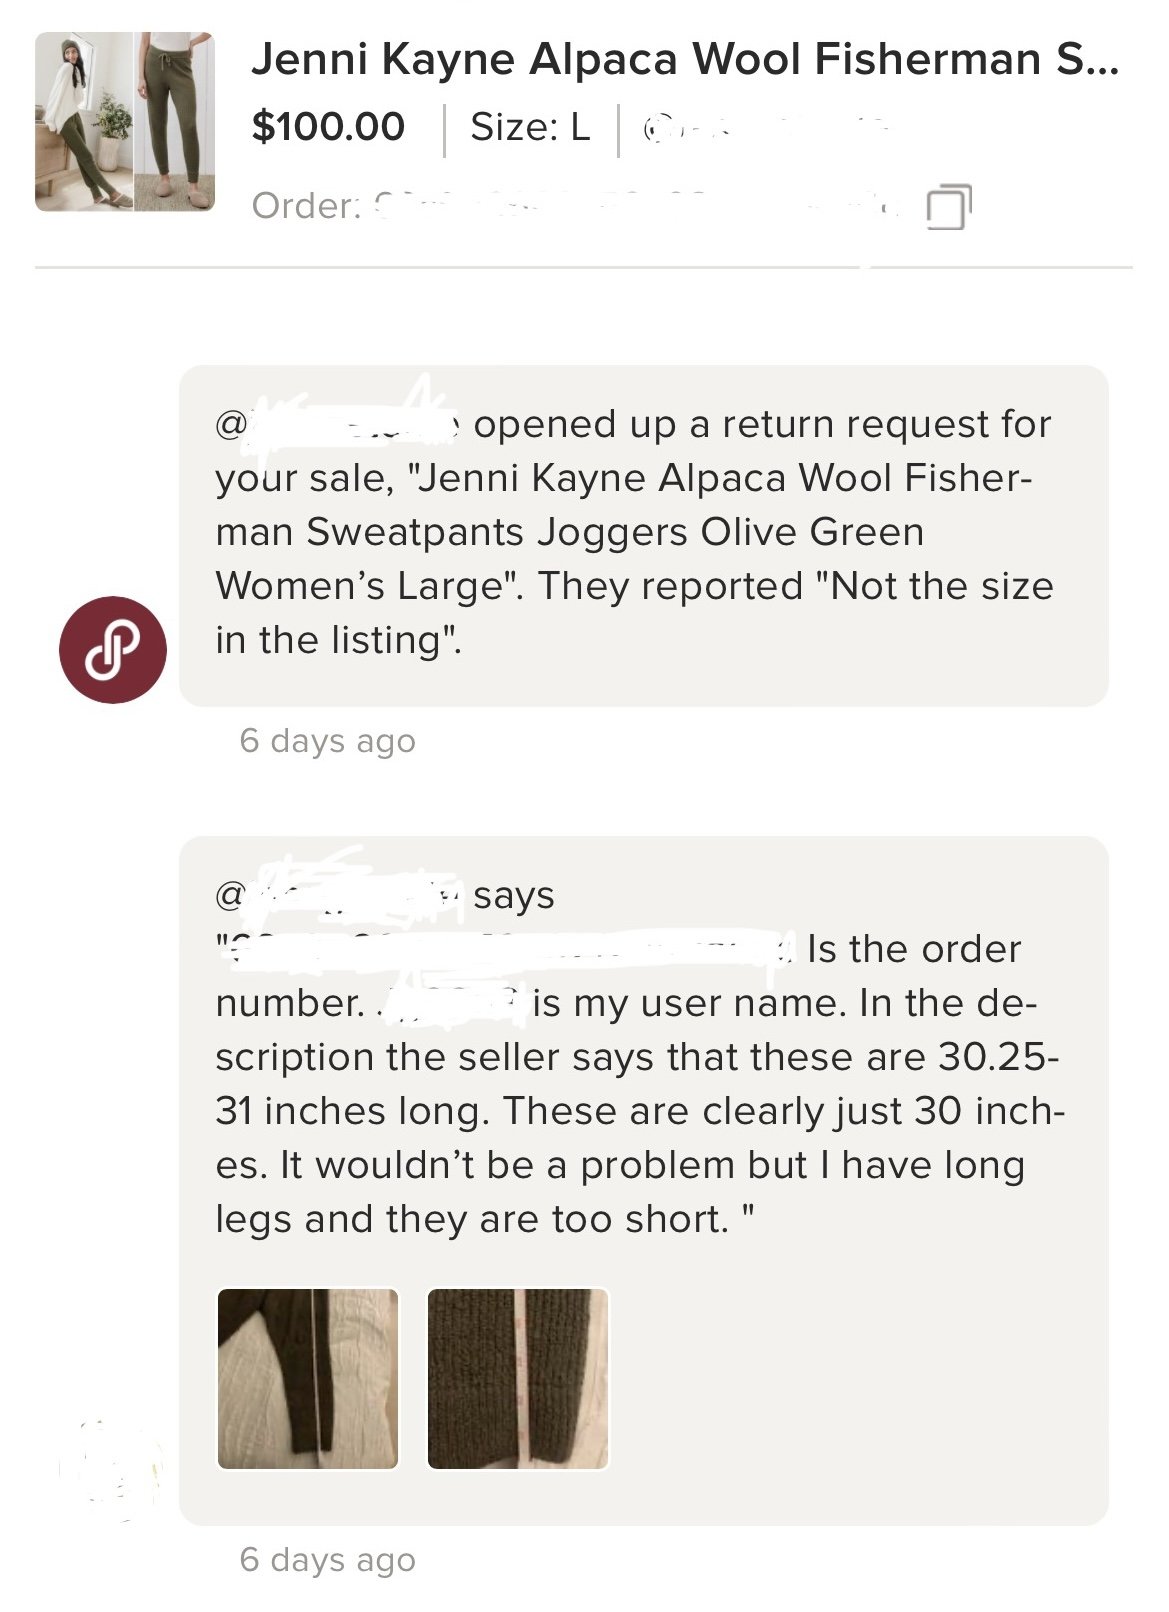 Sold an item on Poshmark. Buyer is having a hard time proving the